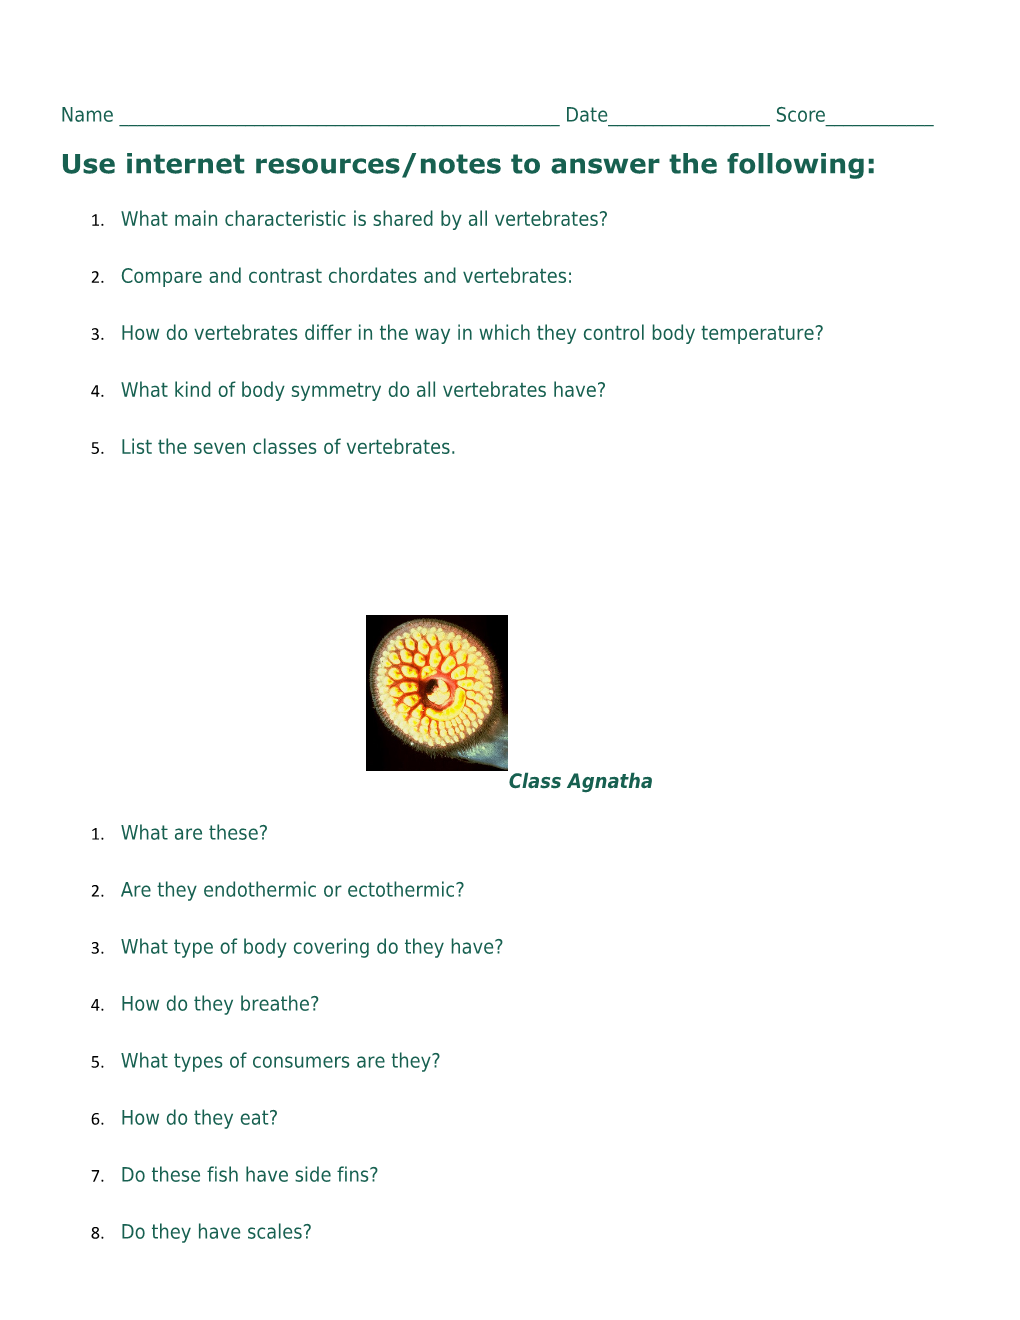 Use Internet Resources/Notes to Answer the Following